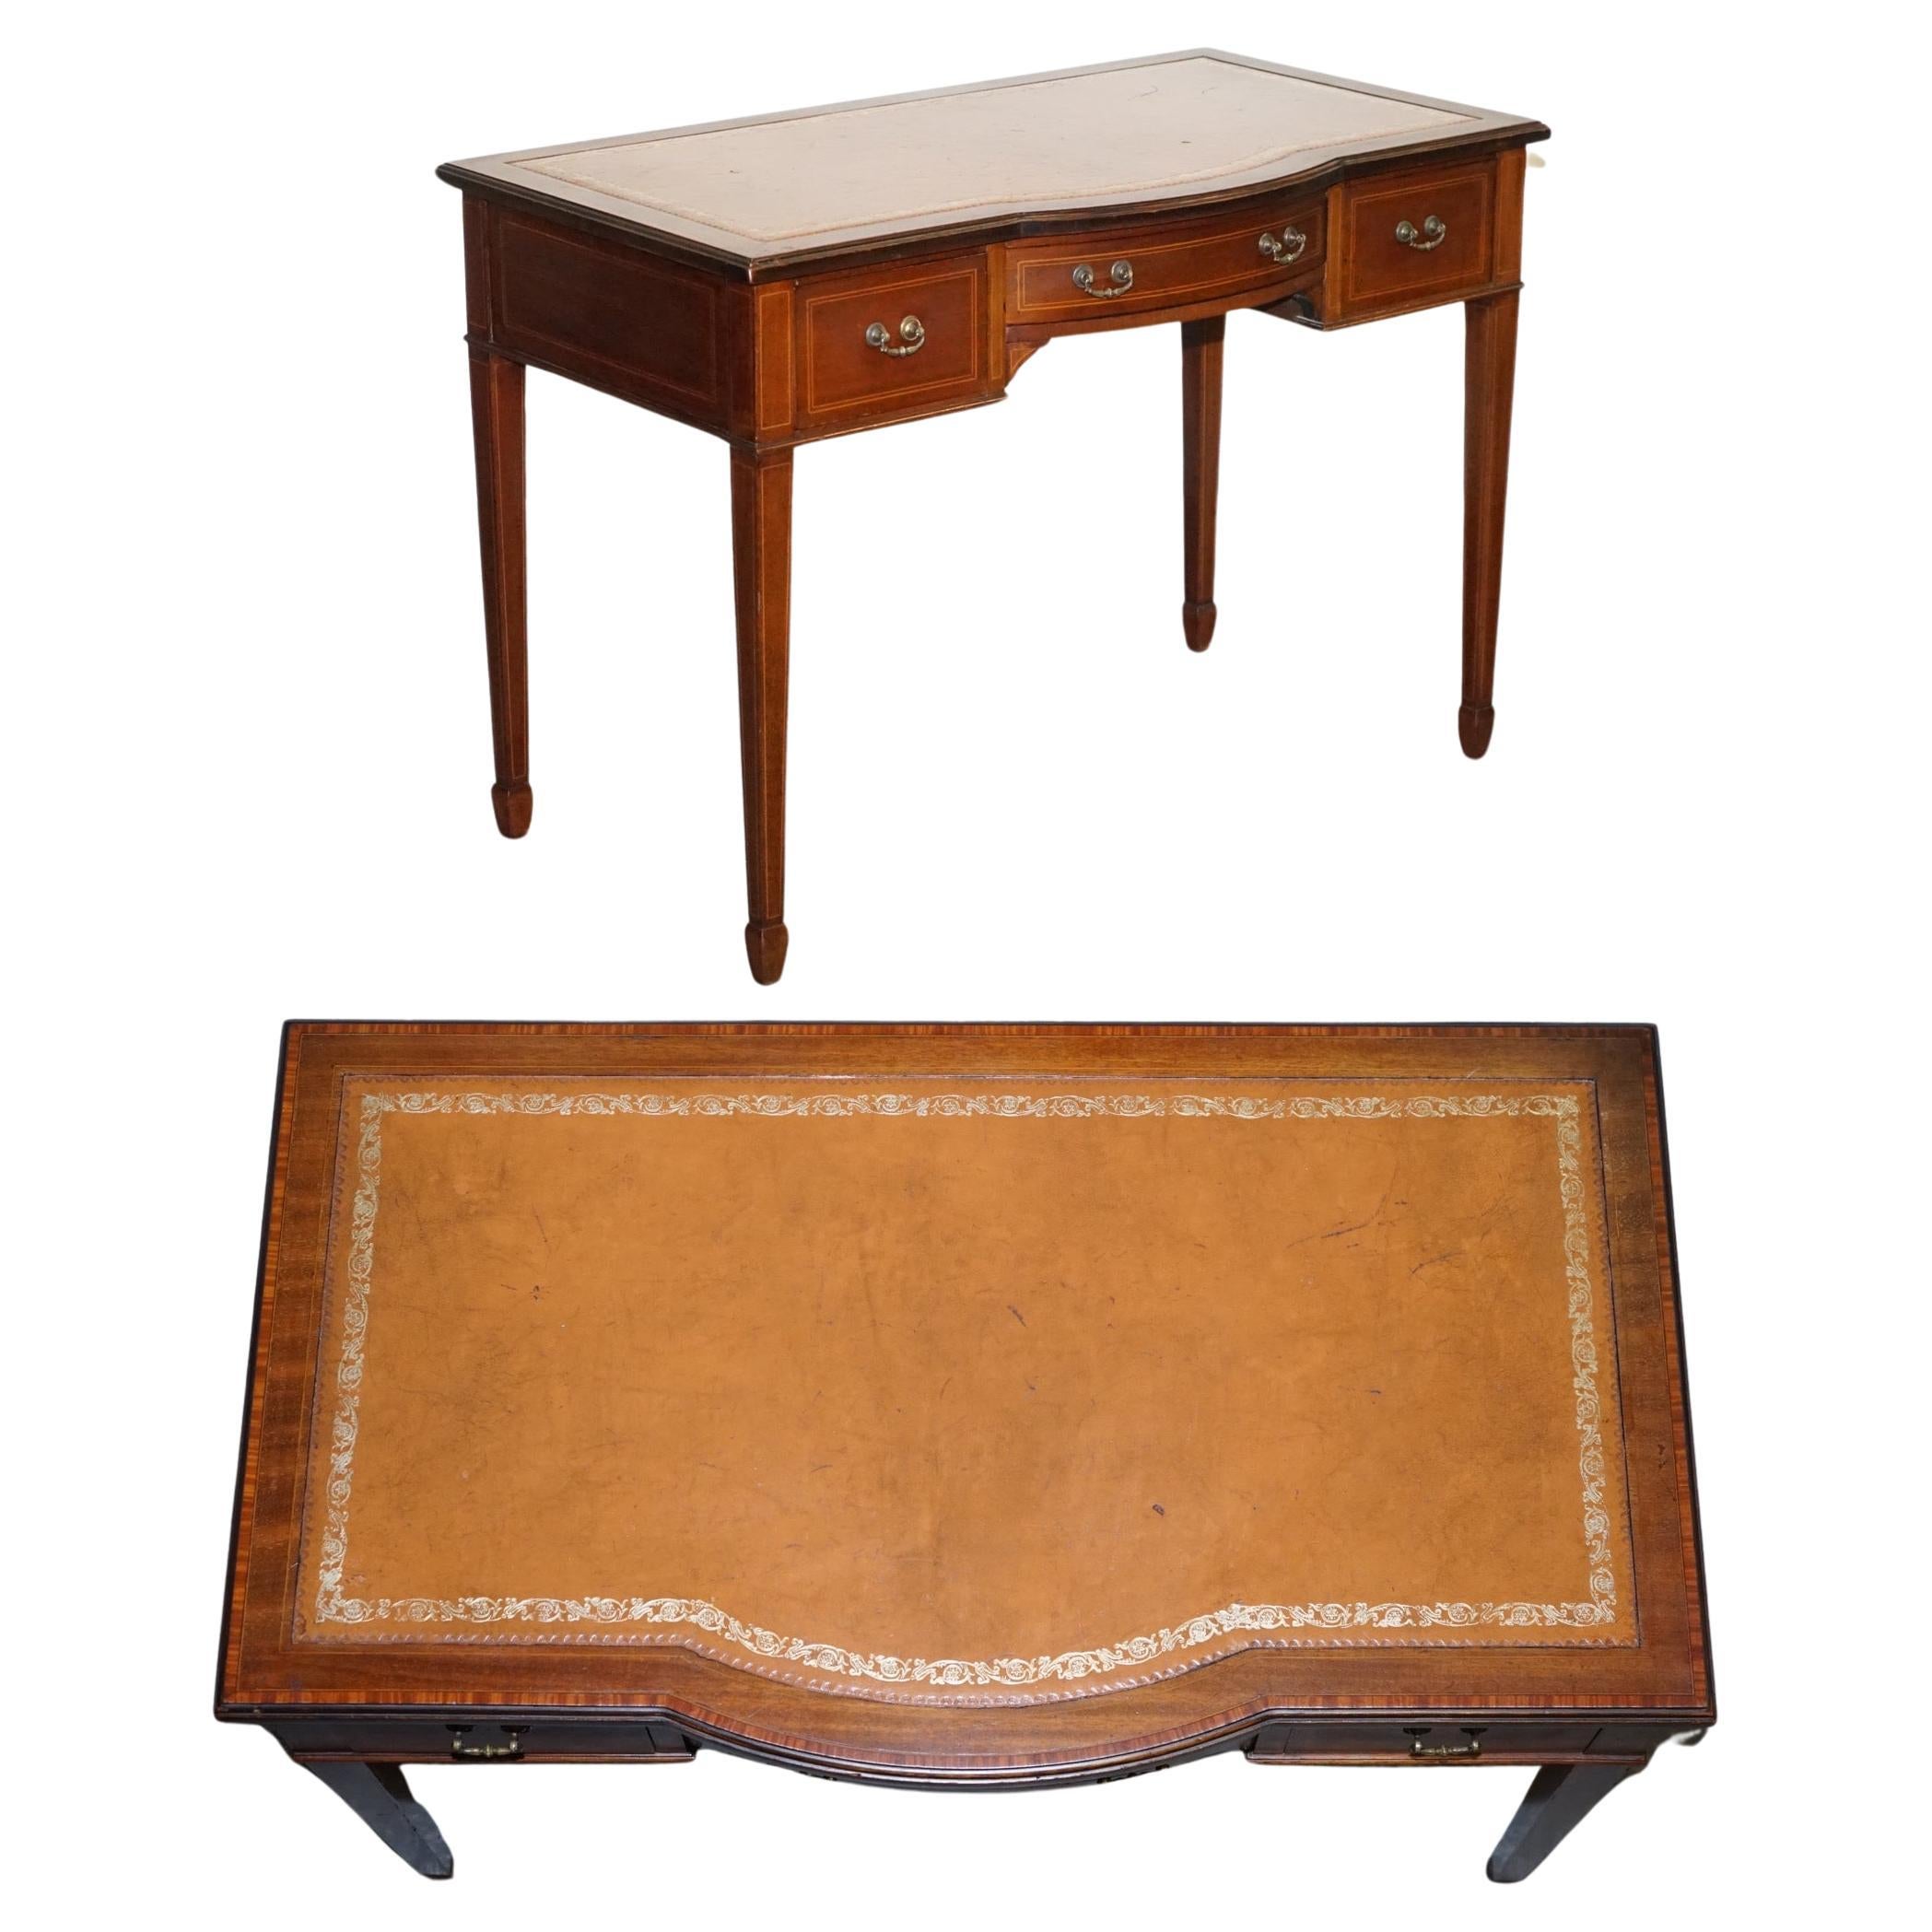 EDWARDIAN 1880er Jahre STAMPED MAPLE & CO BROWN LEATHER SHERATON WRITING DESK TABLE 